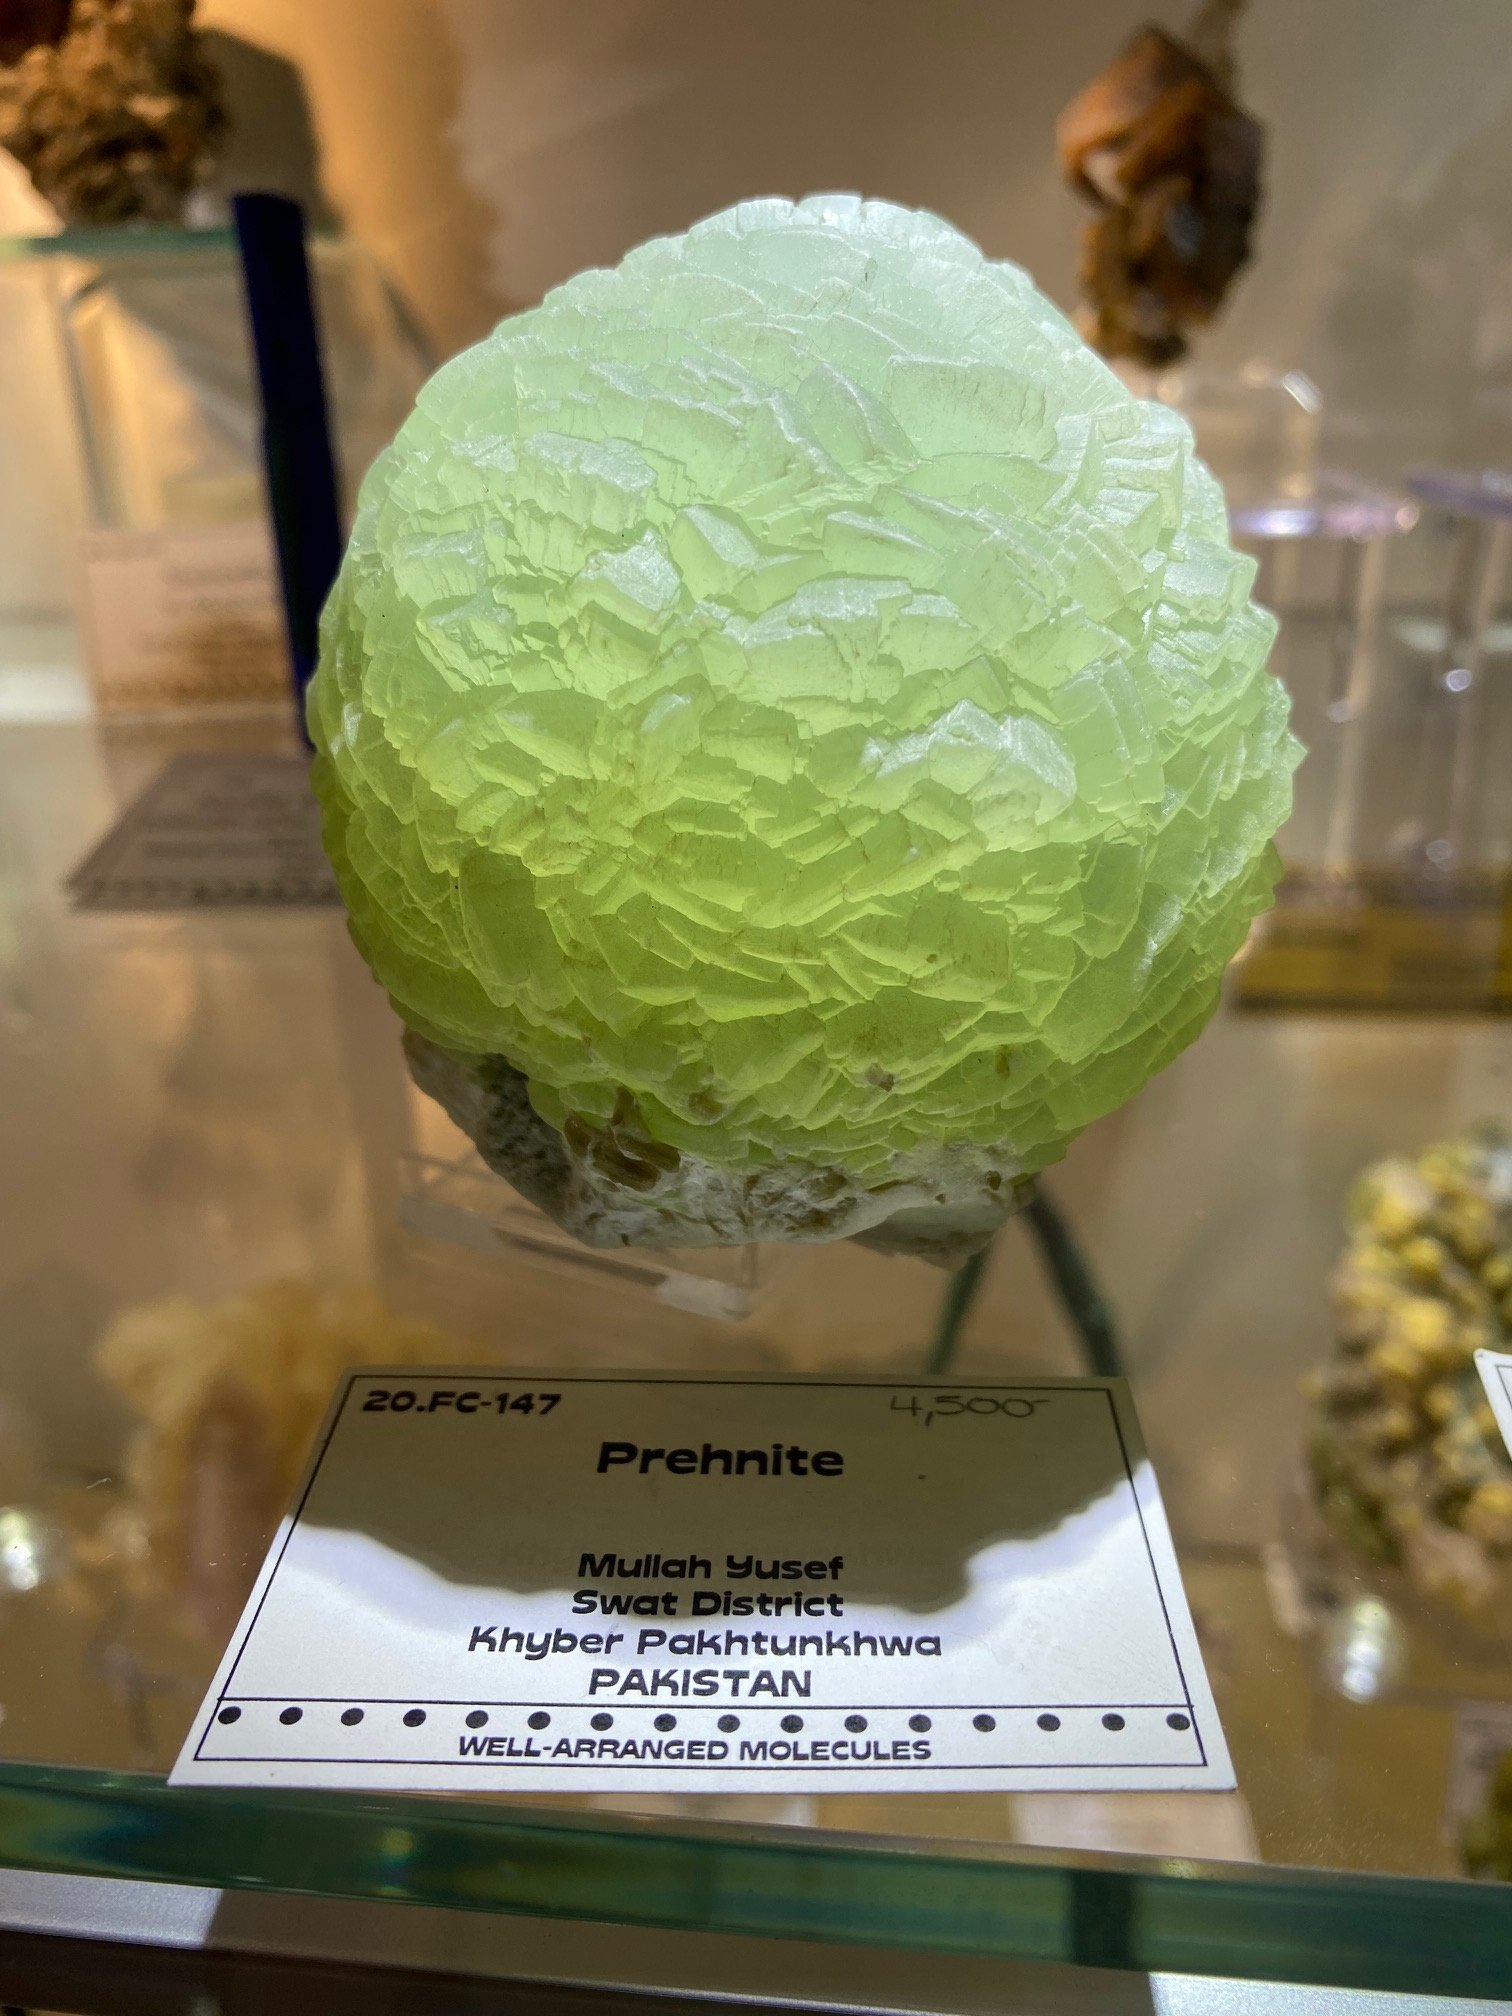 Nice Prehnite spotted at the show